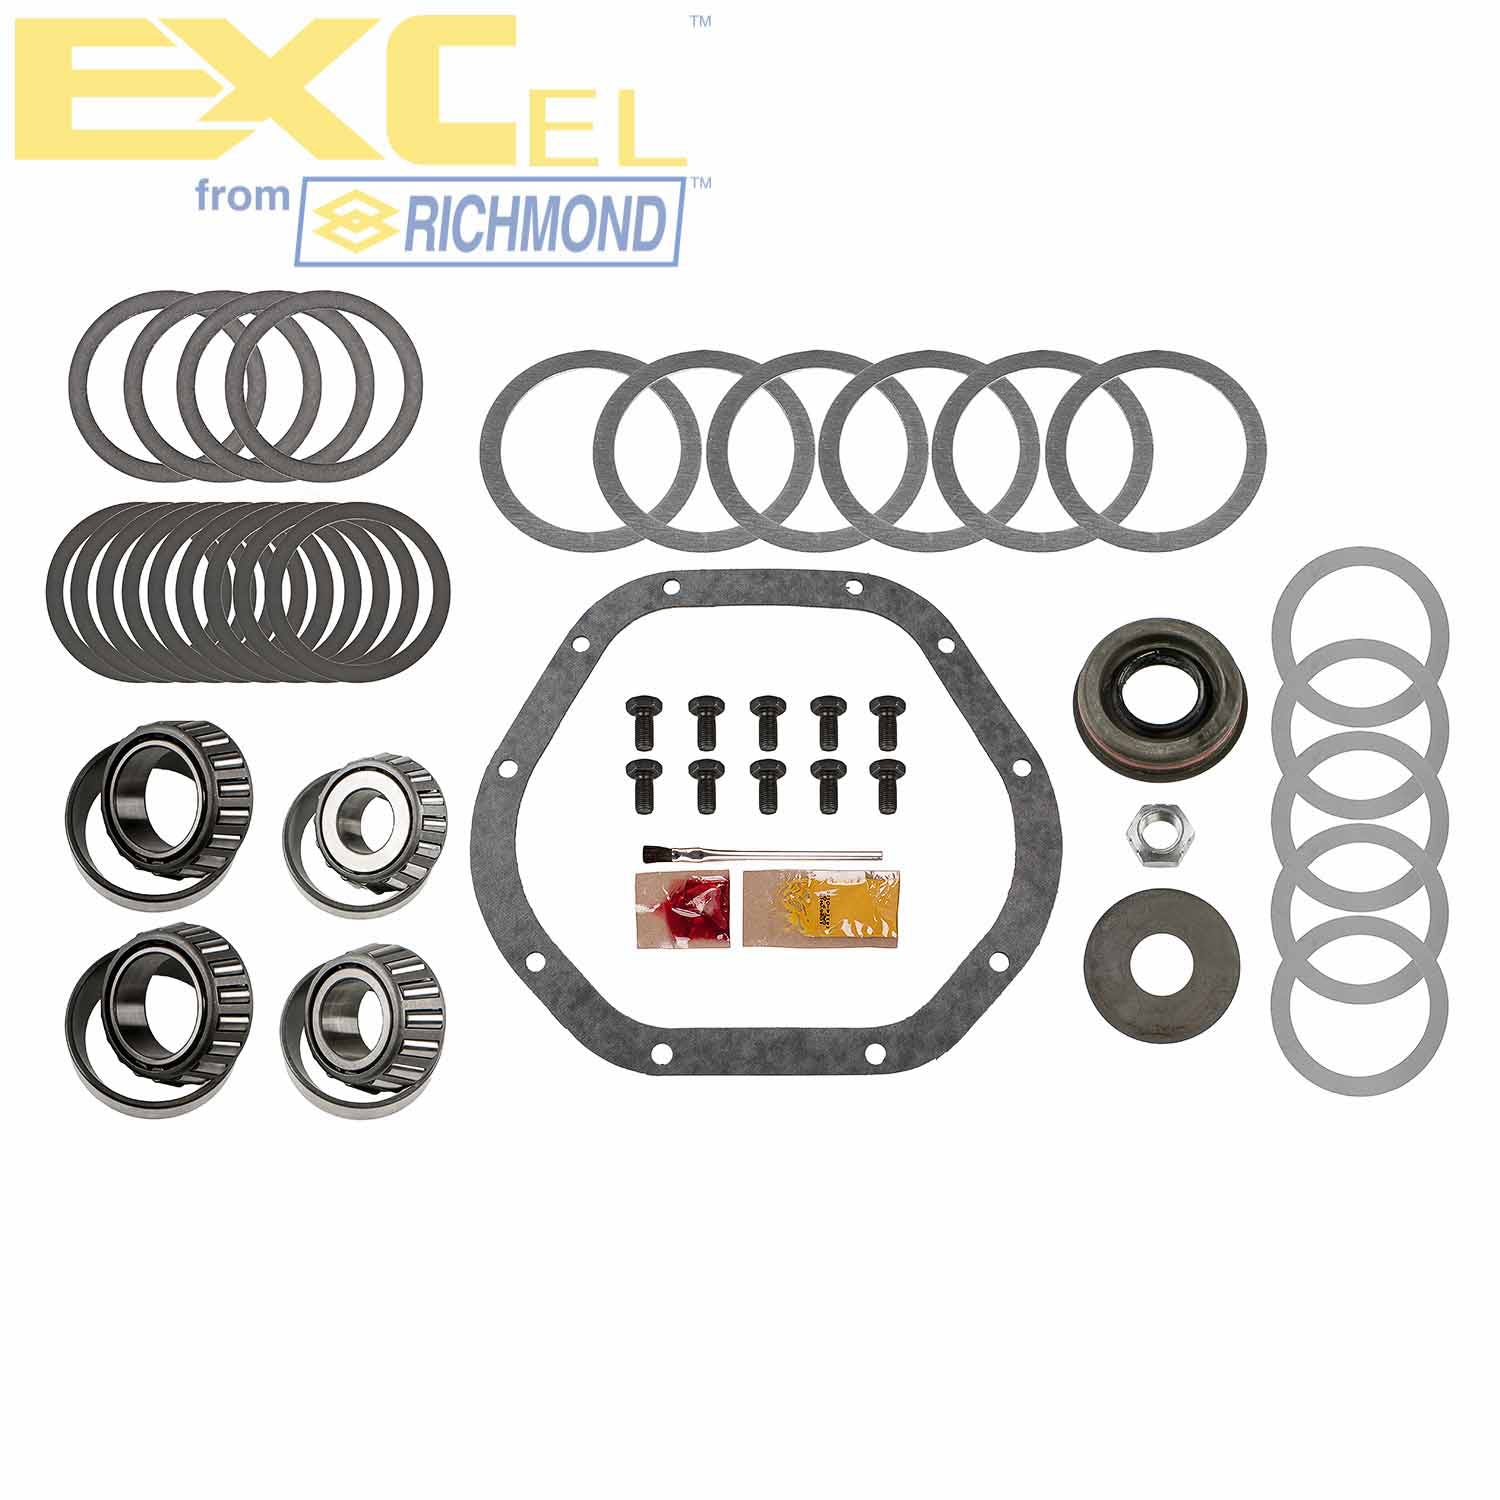 Excel XL-1089-1 Differential Bearing Kit